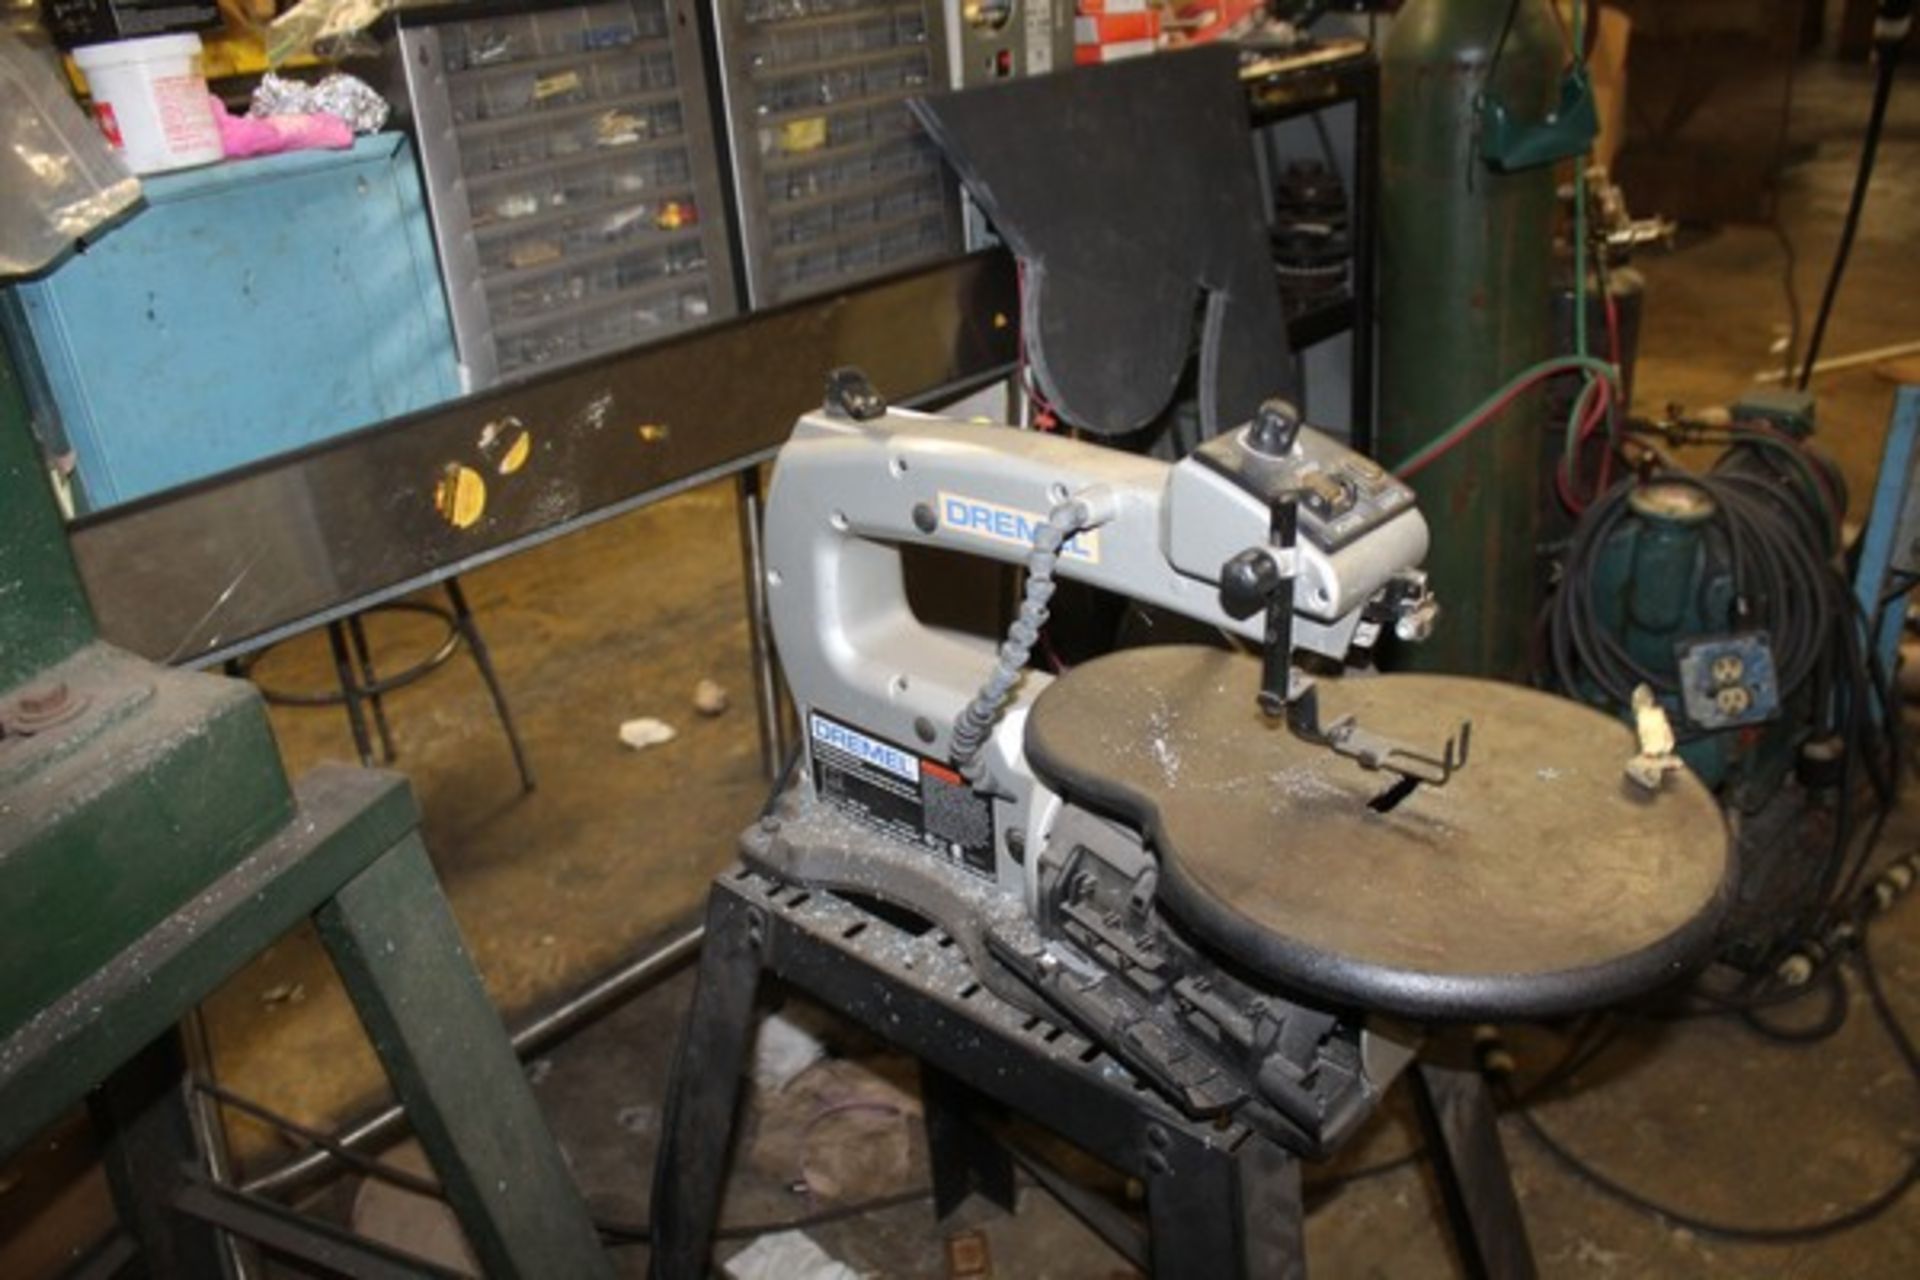 DREMEL 16" VARIABLE SPEED SCROLL SAW, MODEL 1680, WITH STAND - Image 2 of 3